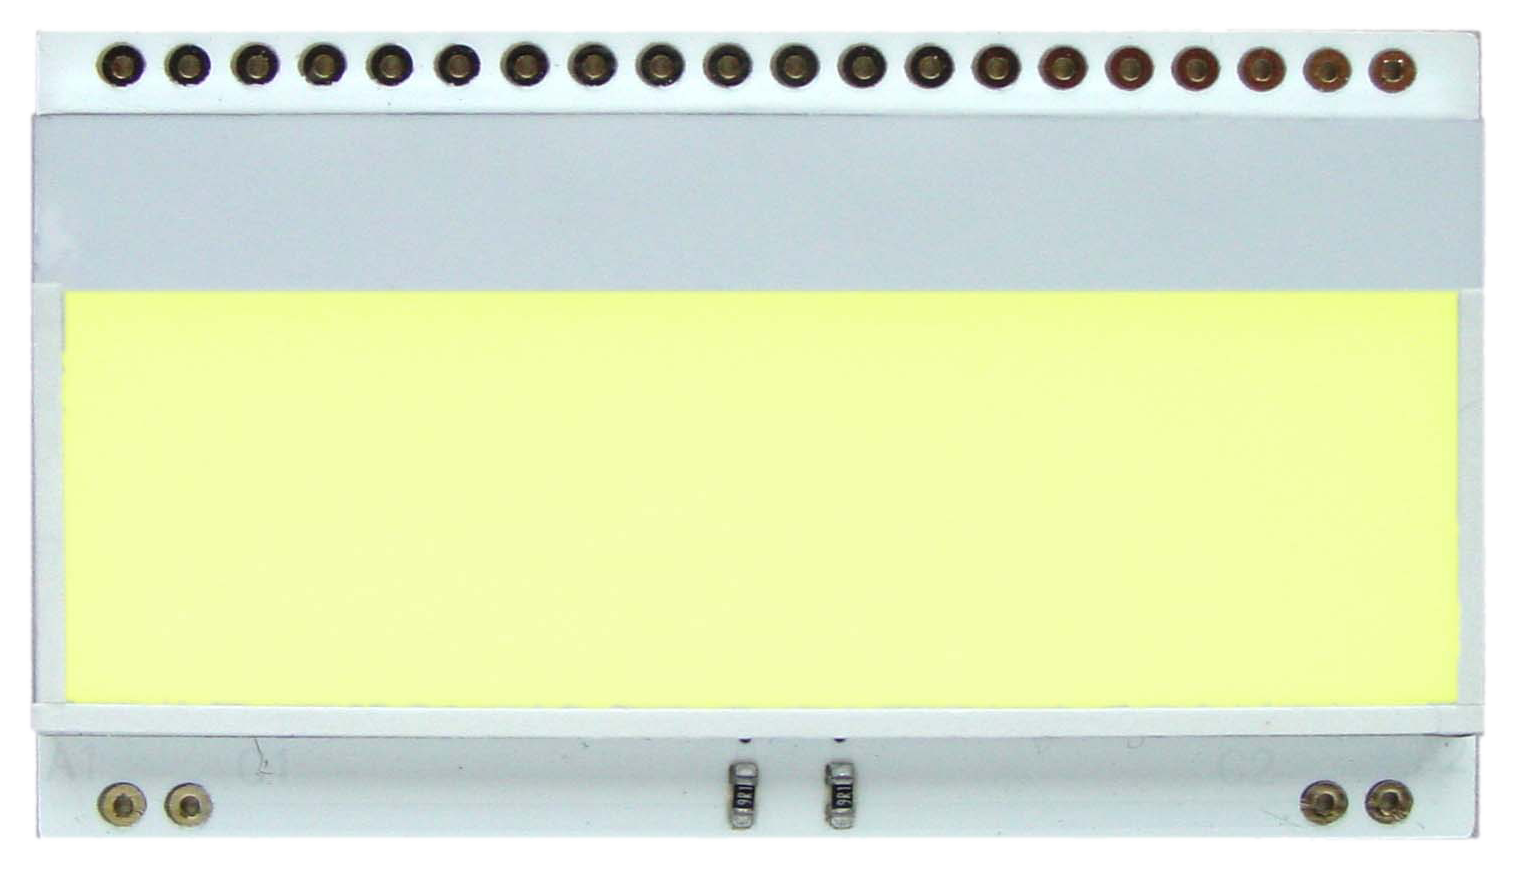 LED backlit unit for EA DOGM081-A / DOGM162-A / DOGM163-A / DOGM132-5, yellow/green